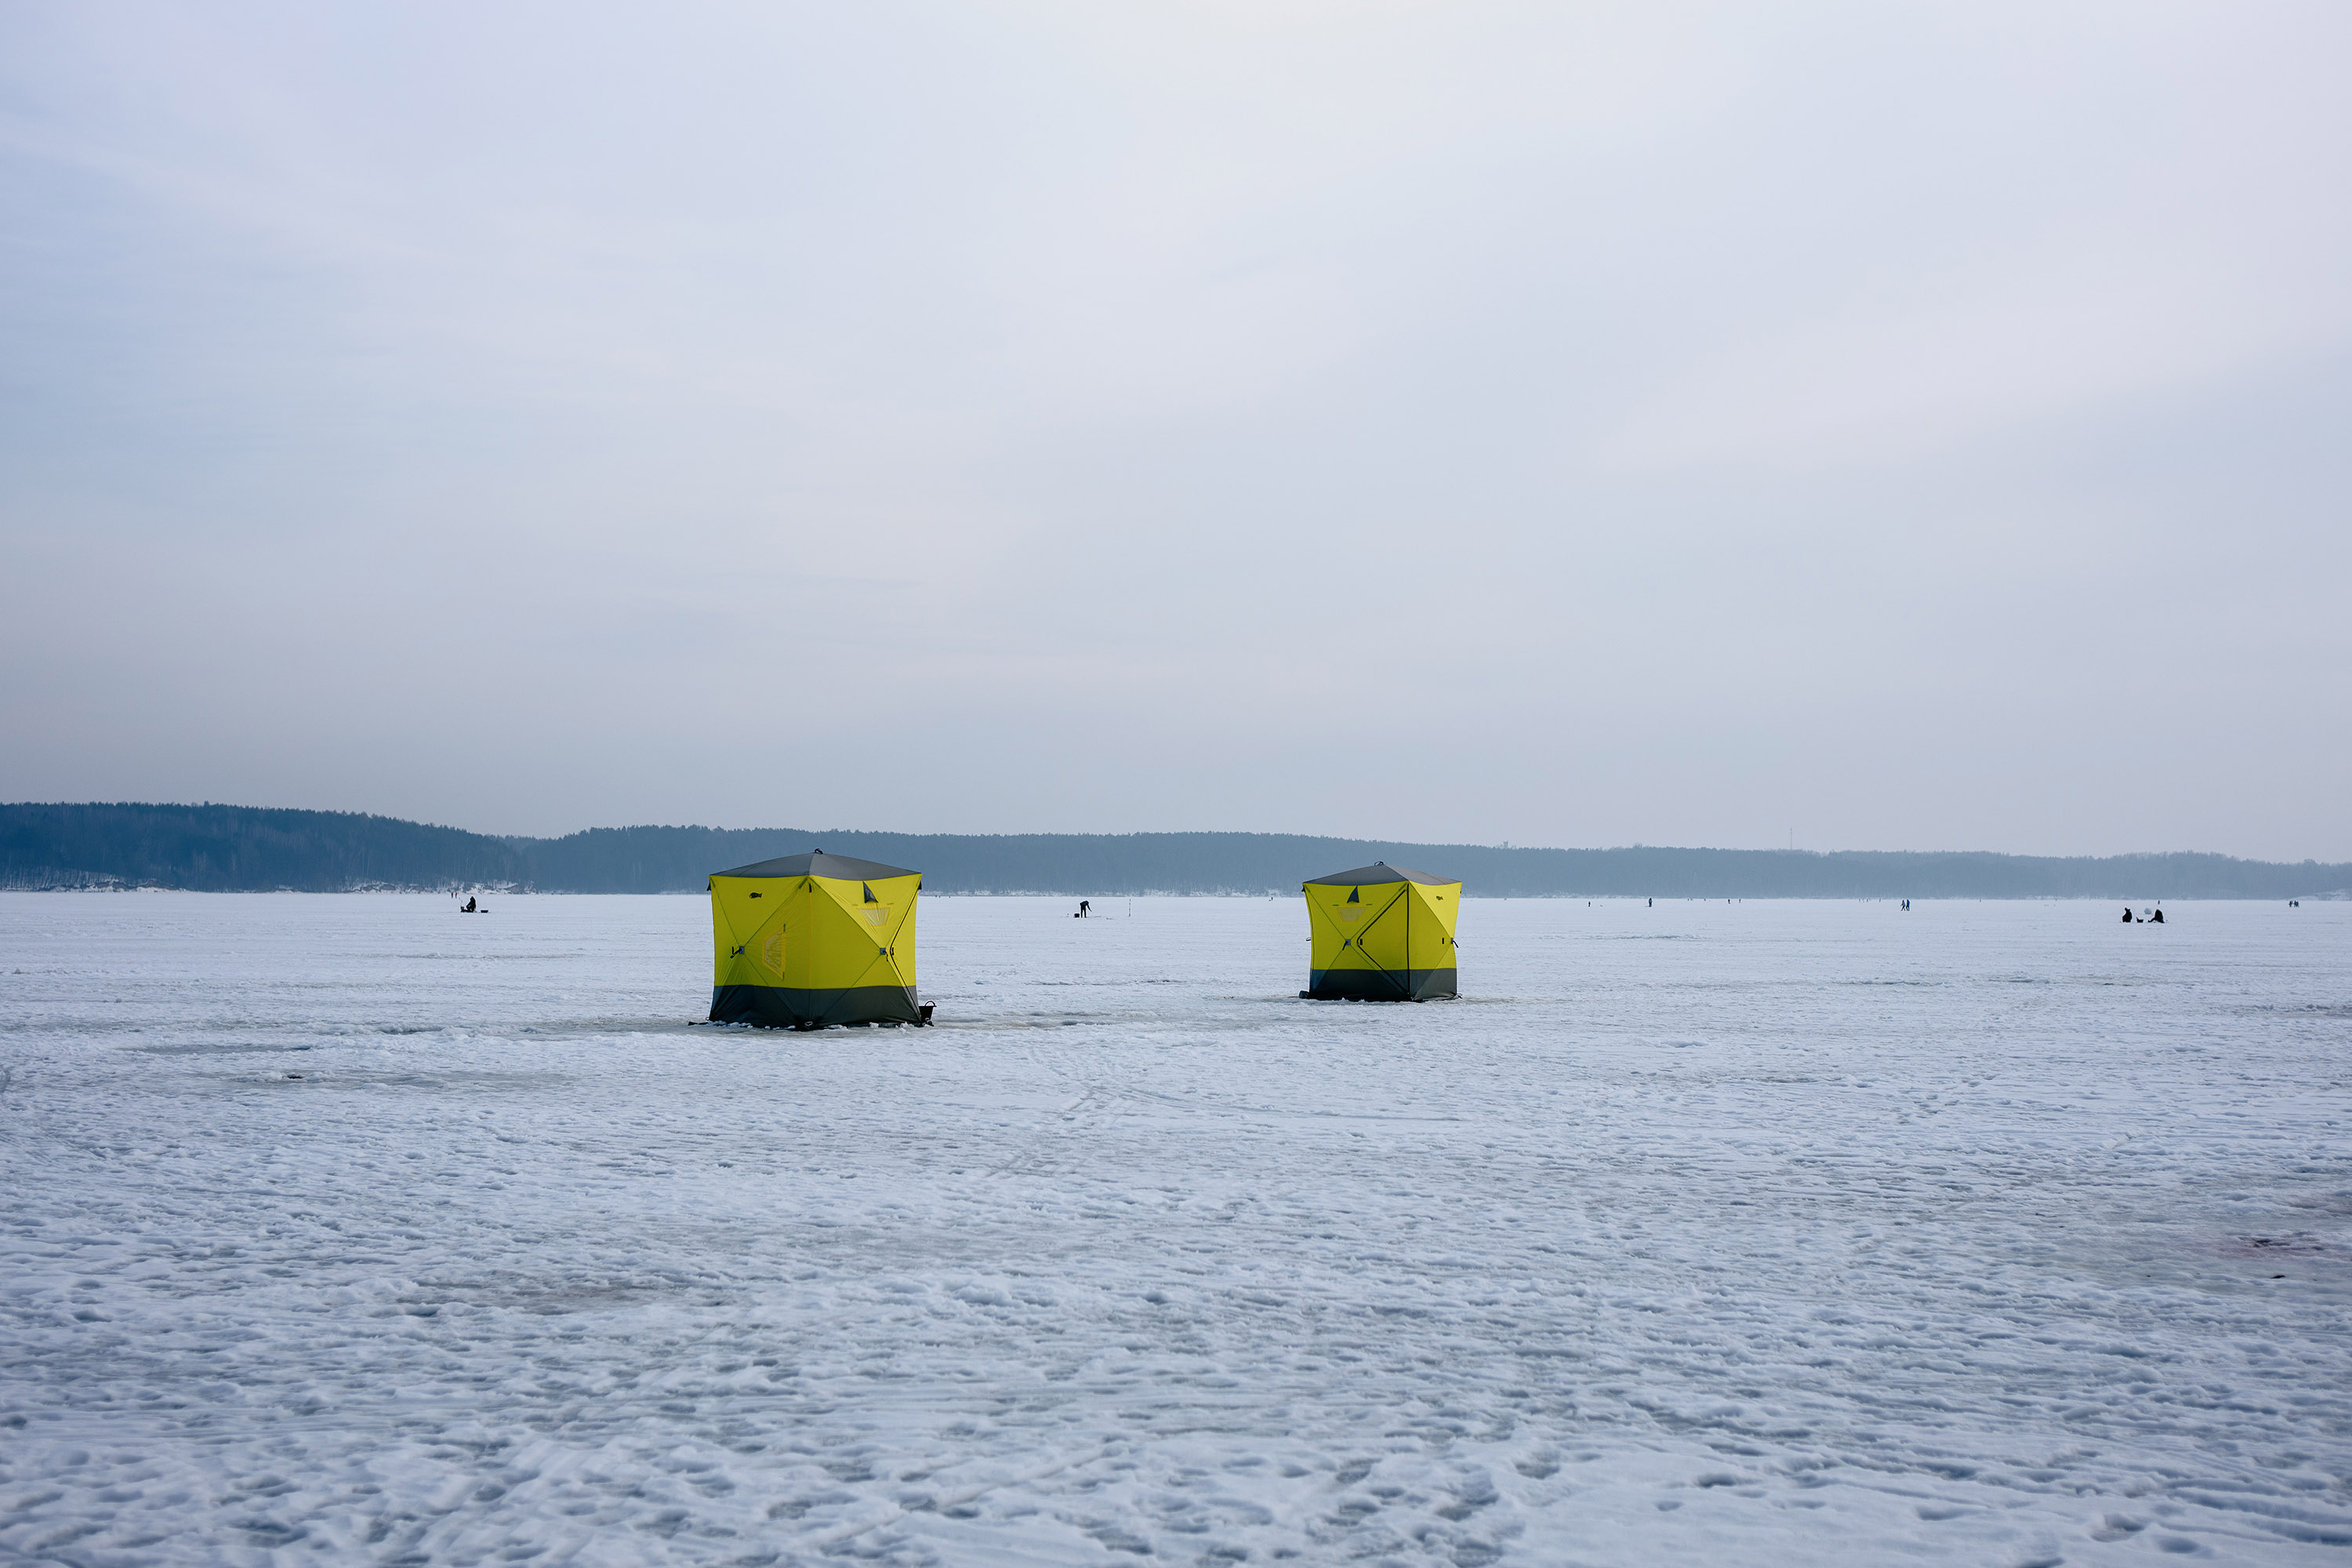 Nuclear reactors? No, just fisherman's tents on a frozen lagoon. Shot at f4.